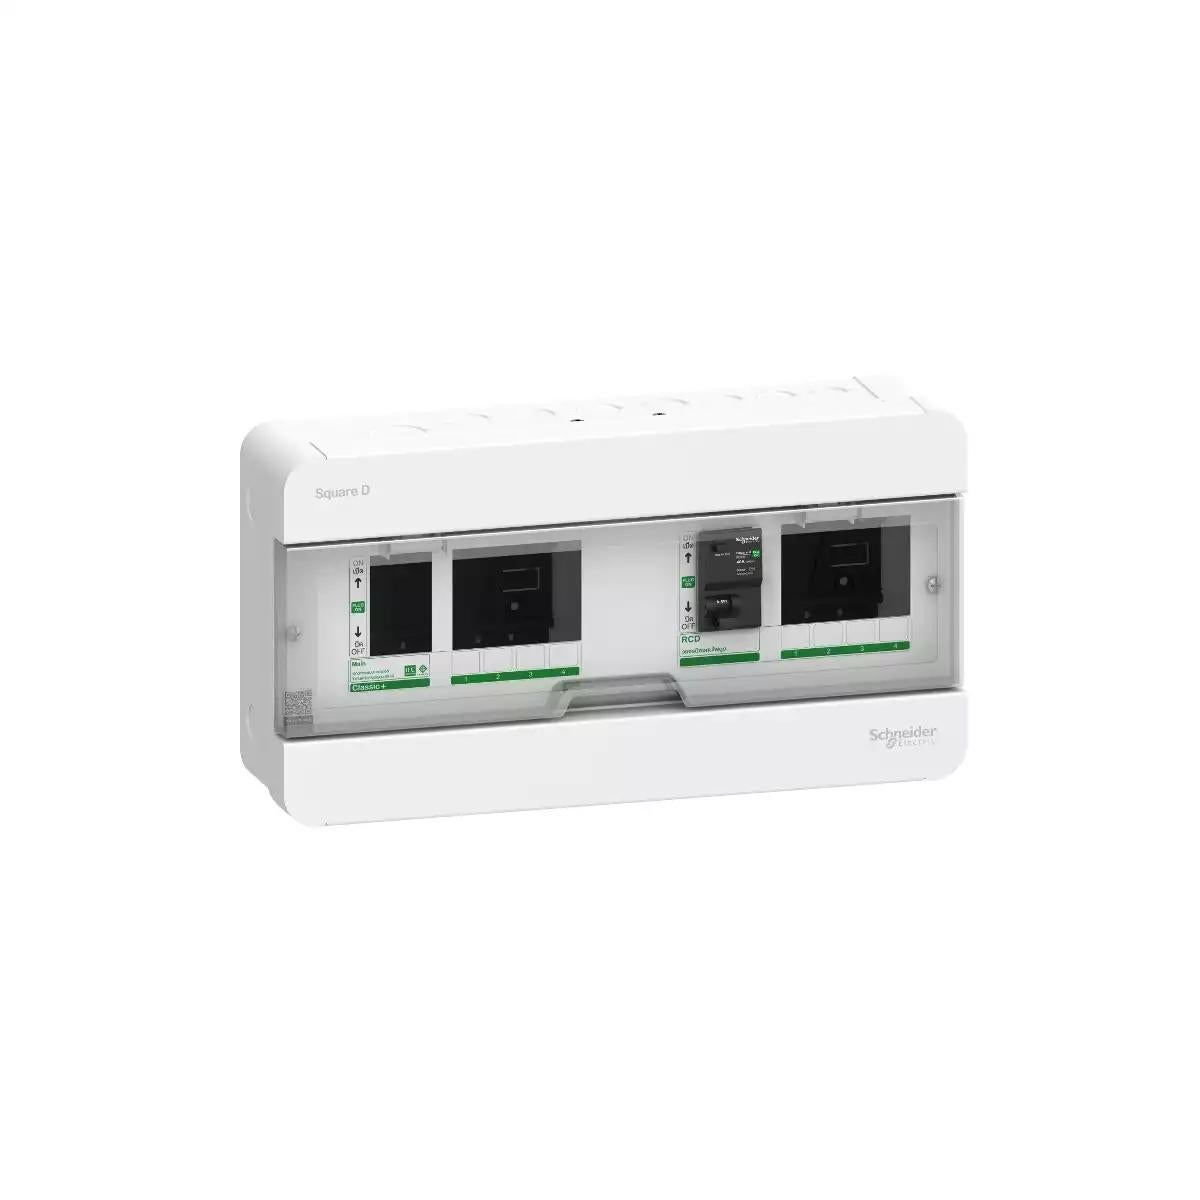 Square D Classic+ Split consumer unit - Surface mounted - 4+4 ways RCCB 40A